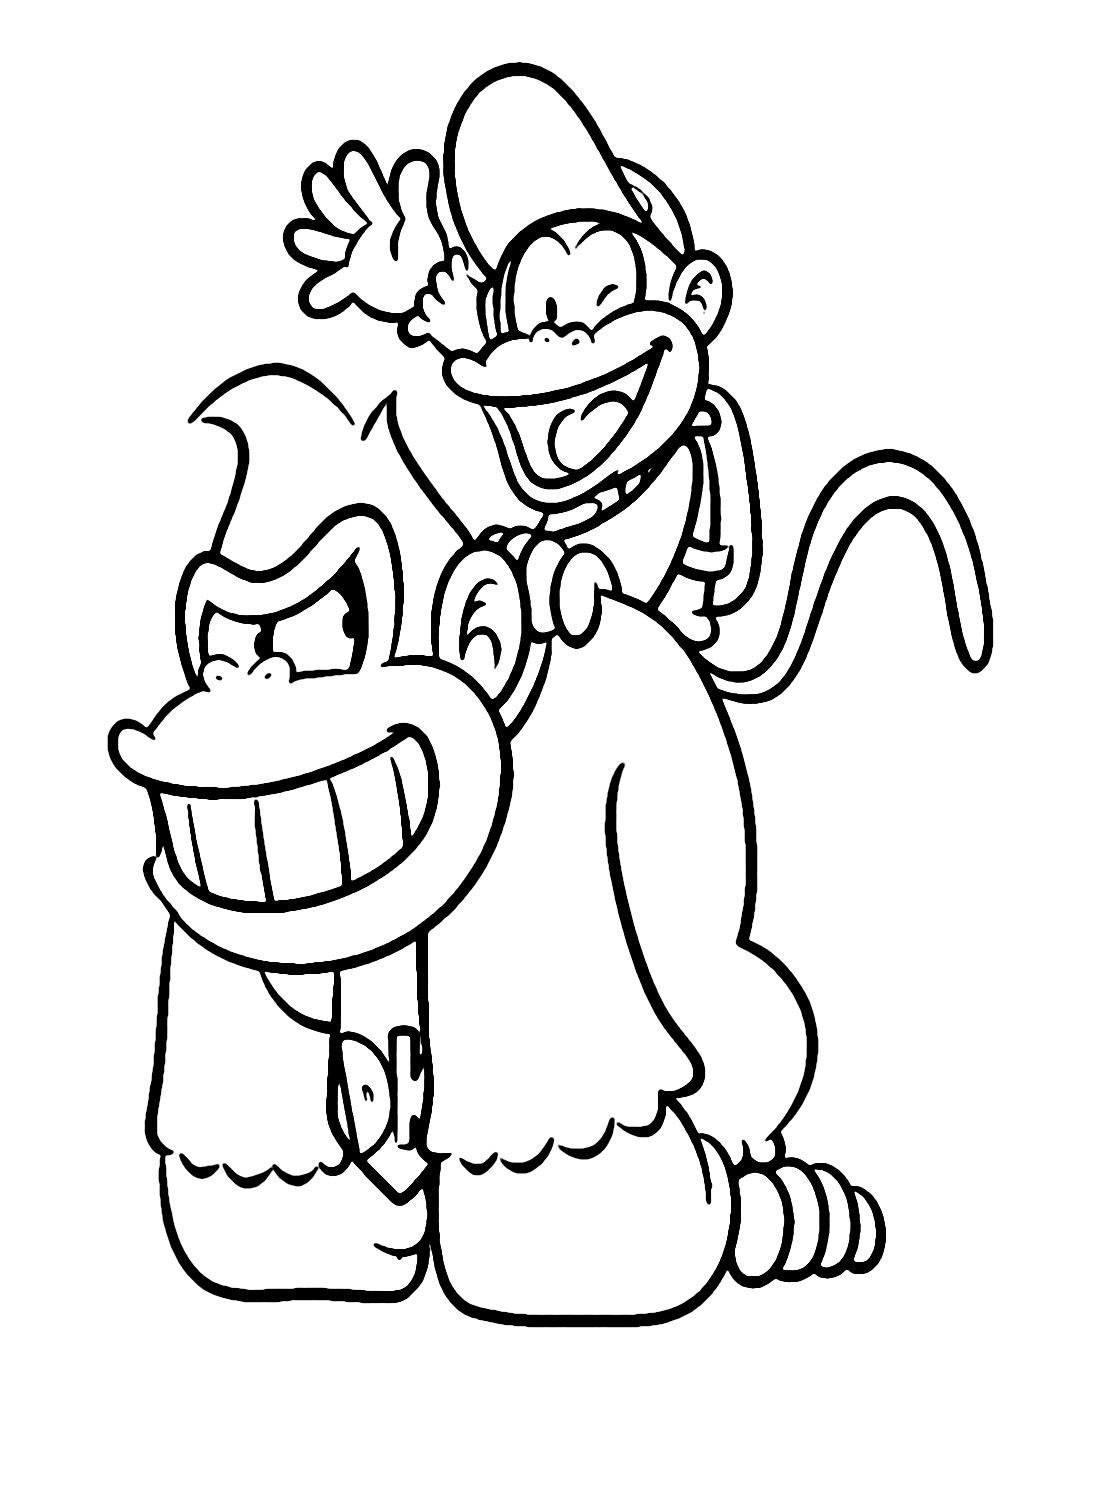 Donkey Kong And Diddy Kong Coloring Page Free Printable Coloring Pages